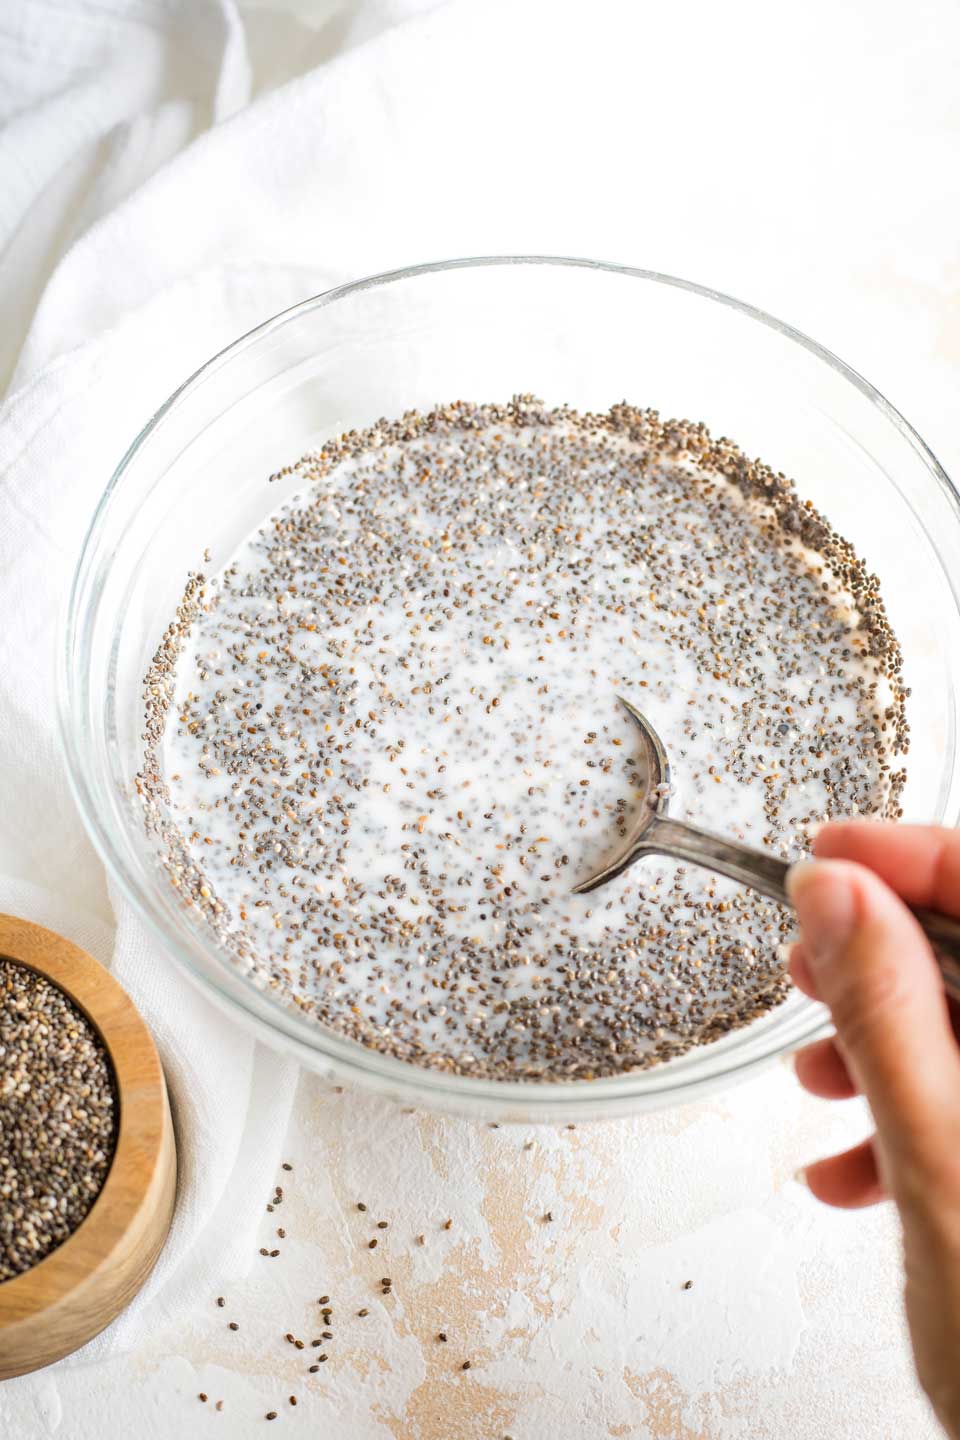 Hand holding spoon, mixing bowl of Chia Pudding